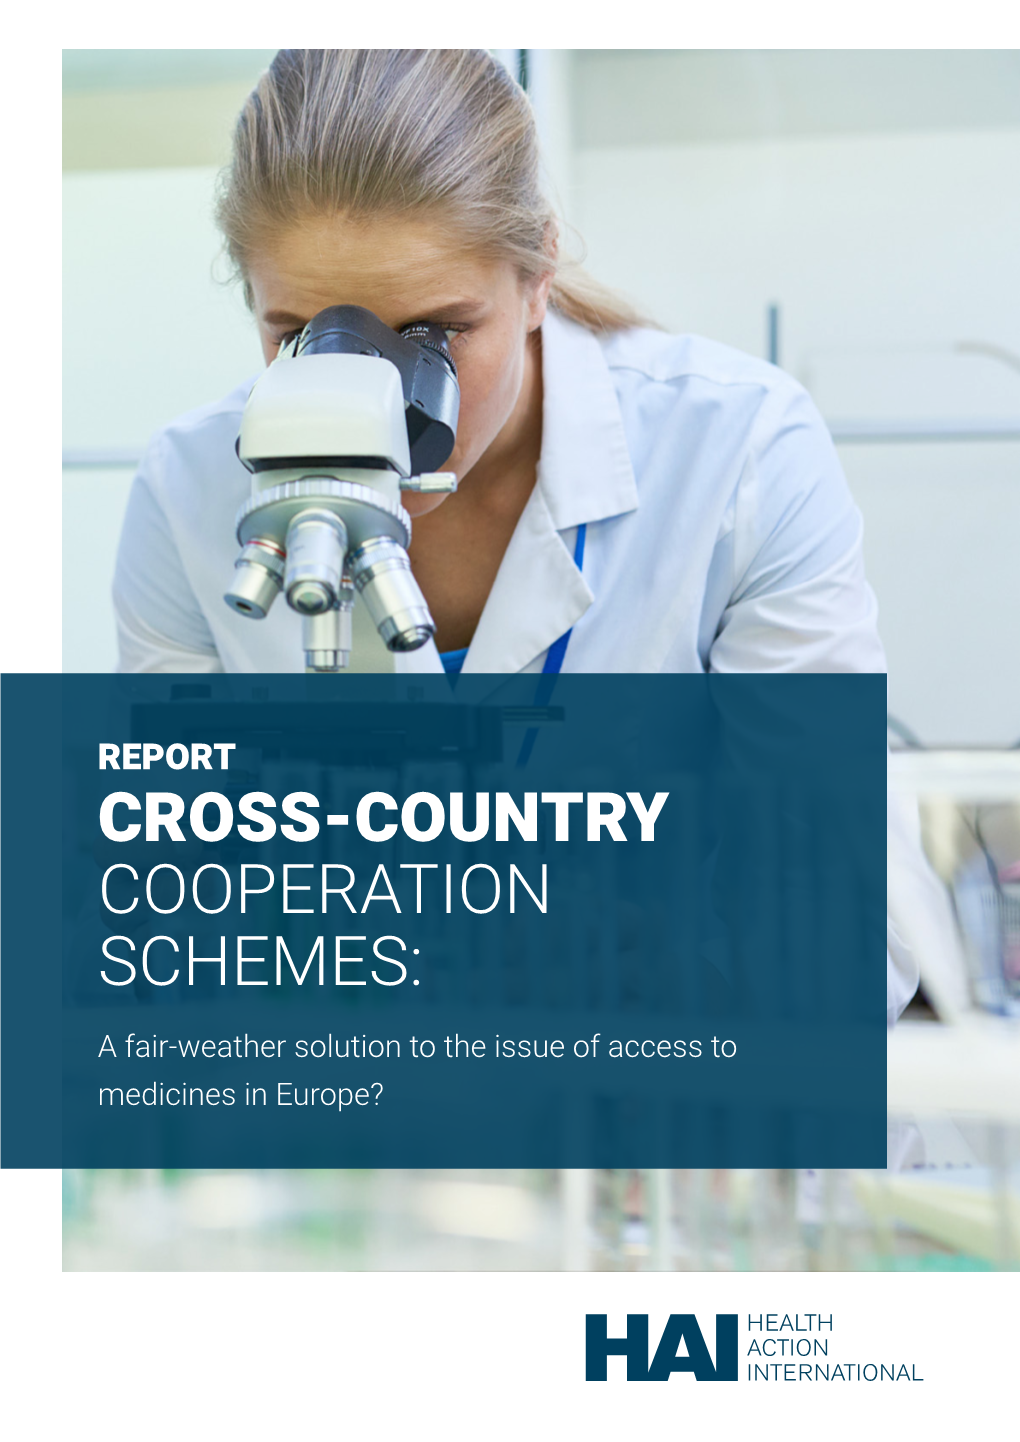 CROSS-COUNTRY COOPERATION SCHEMES: a Fair-Weather Solution to the Issue of Access to Medicines in Europe? HEALTH ACTION INTERNATIONAL